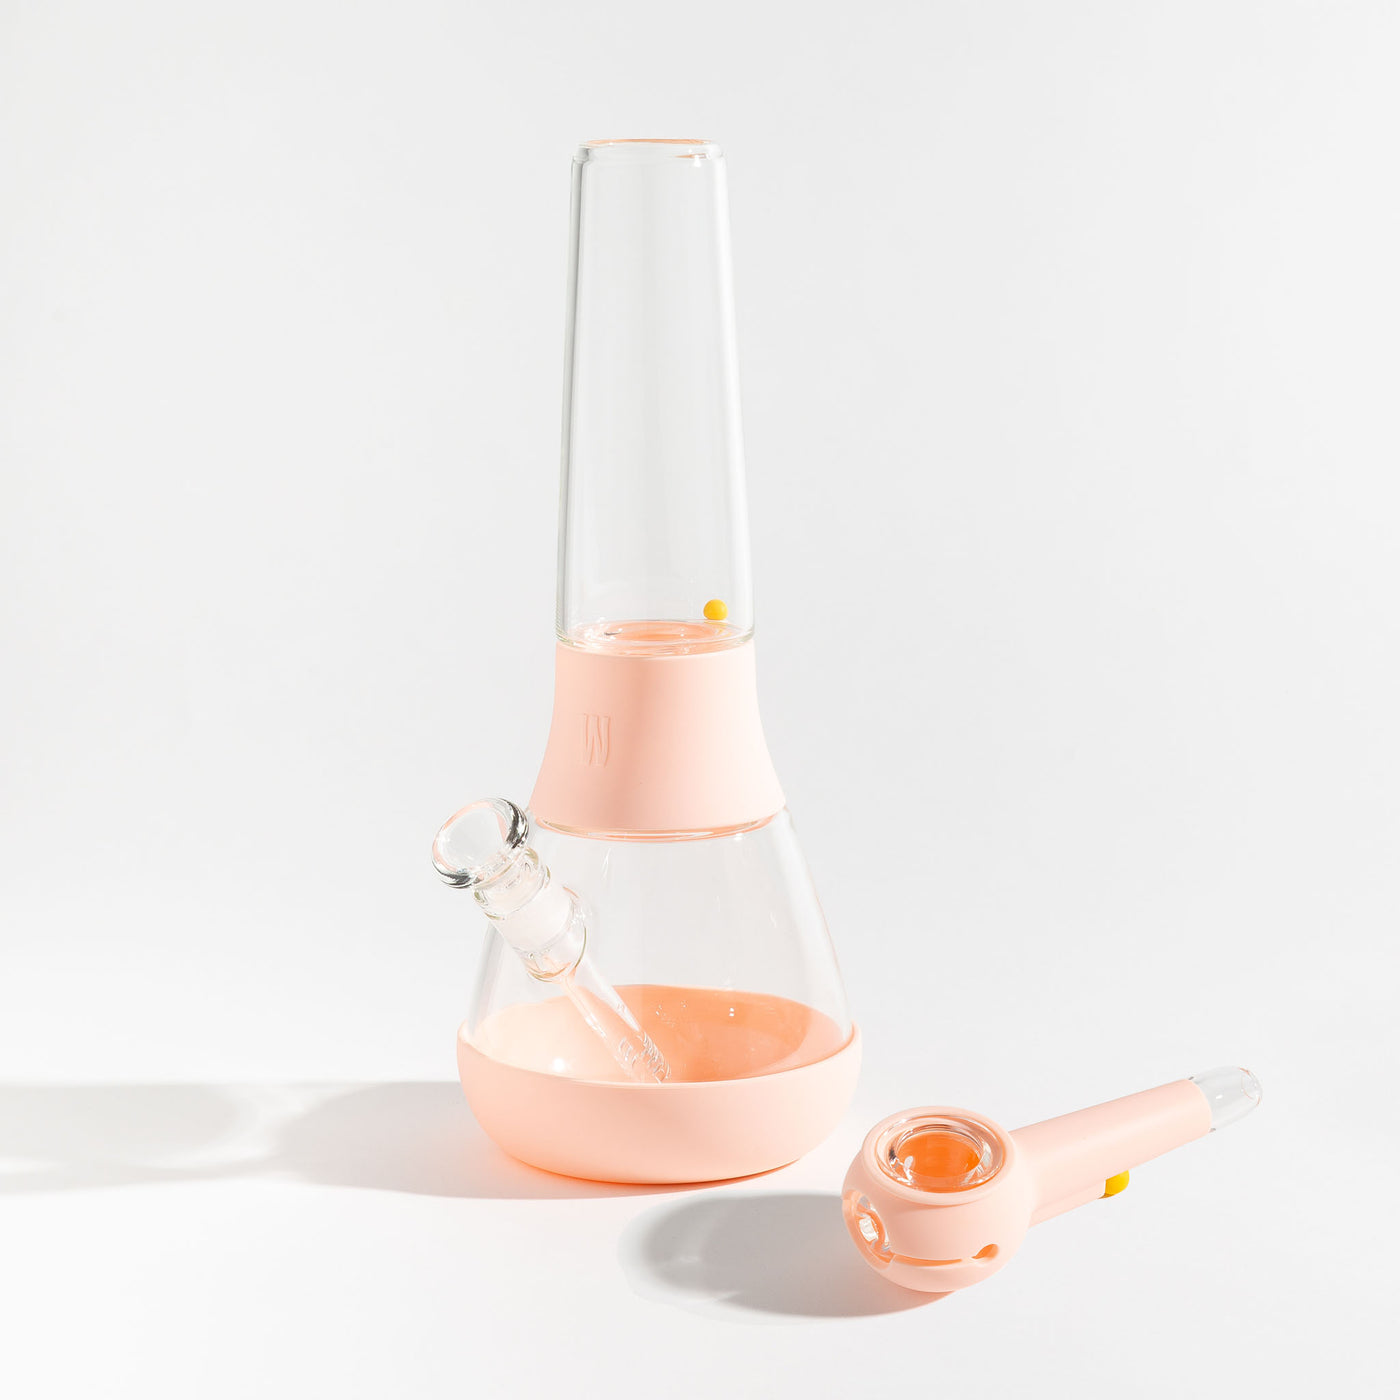 A bundle set of the Weeday modular glass bong and spoon pipe in bubblegum pink silicone covers on a white background.